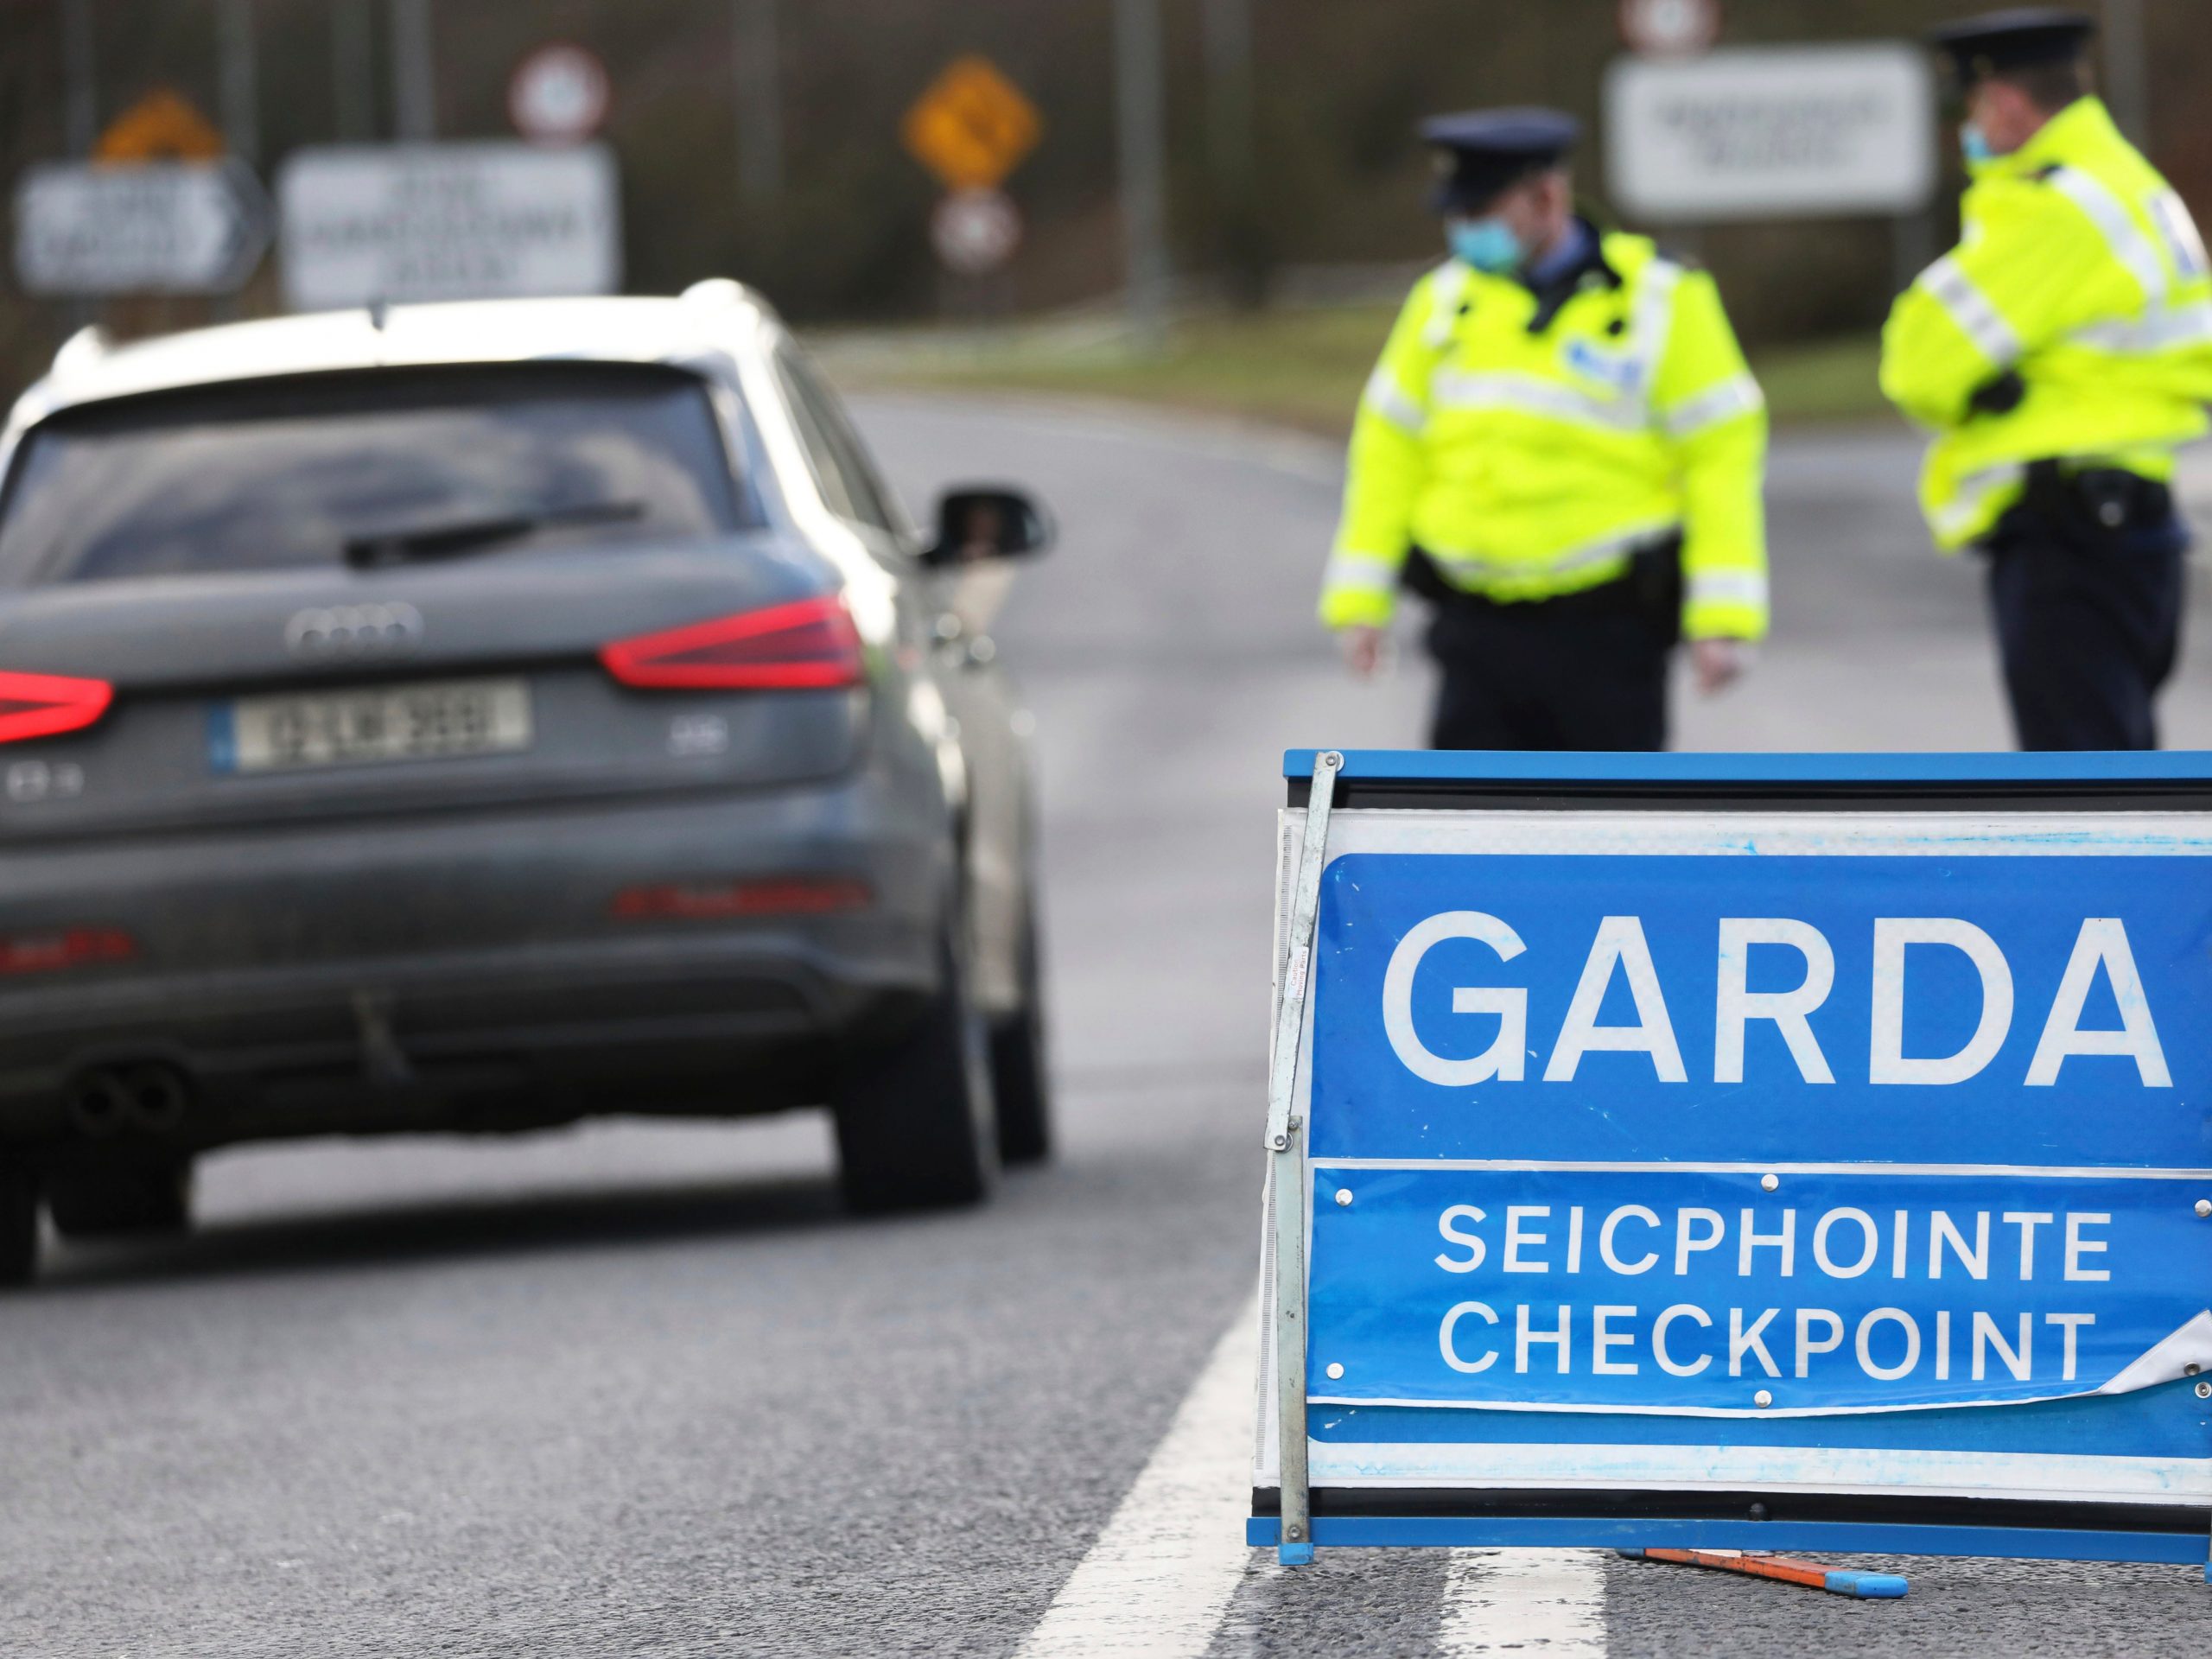 Garda Siochana (Irish Police), patrol a checkpoint close to the Irish border in Ravensdale, Ireland, Monday, Feb. 8, 2021. Checkpoints were set up across the country close to the border to stop people travelling from Northern Ireland into the Republic to enforce the new Covid-19 regulations.